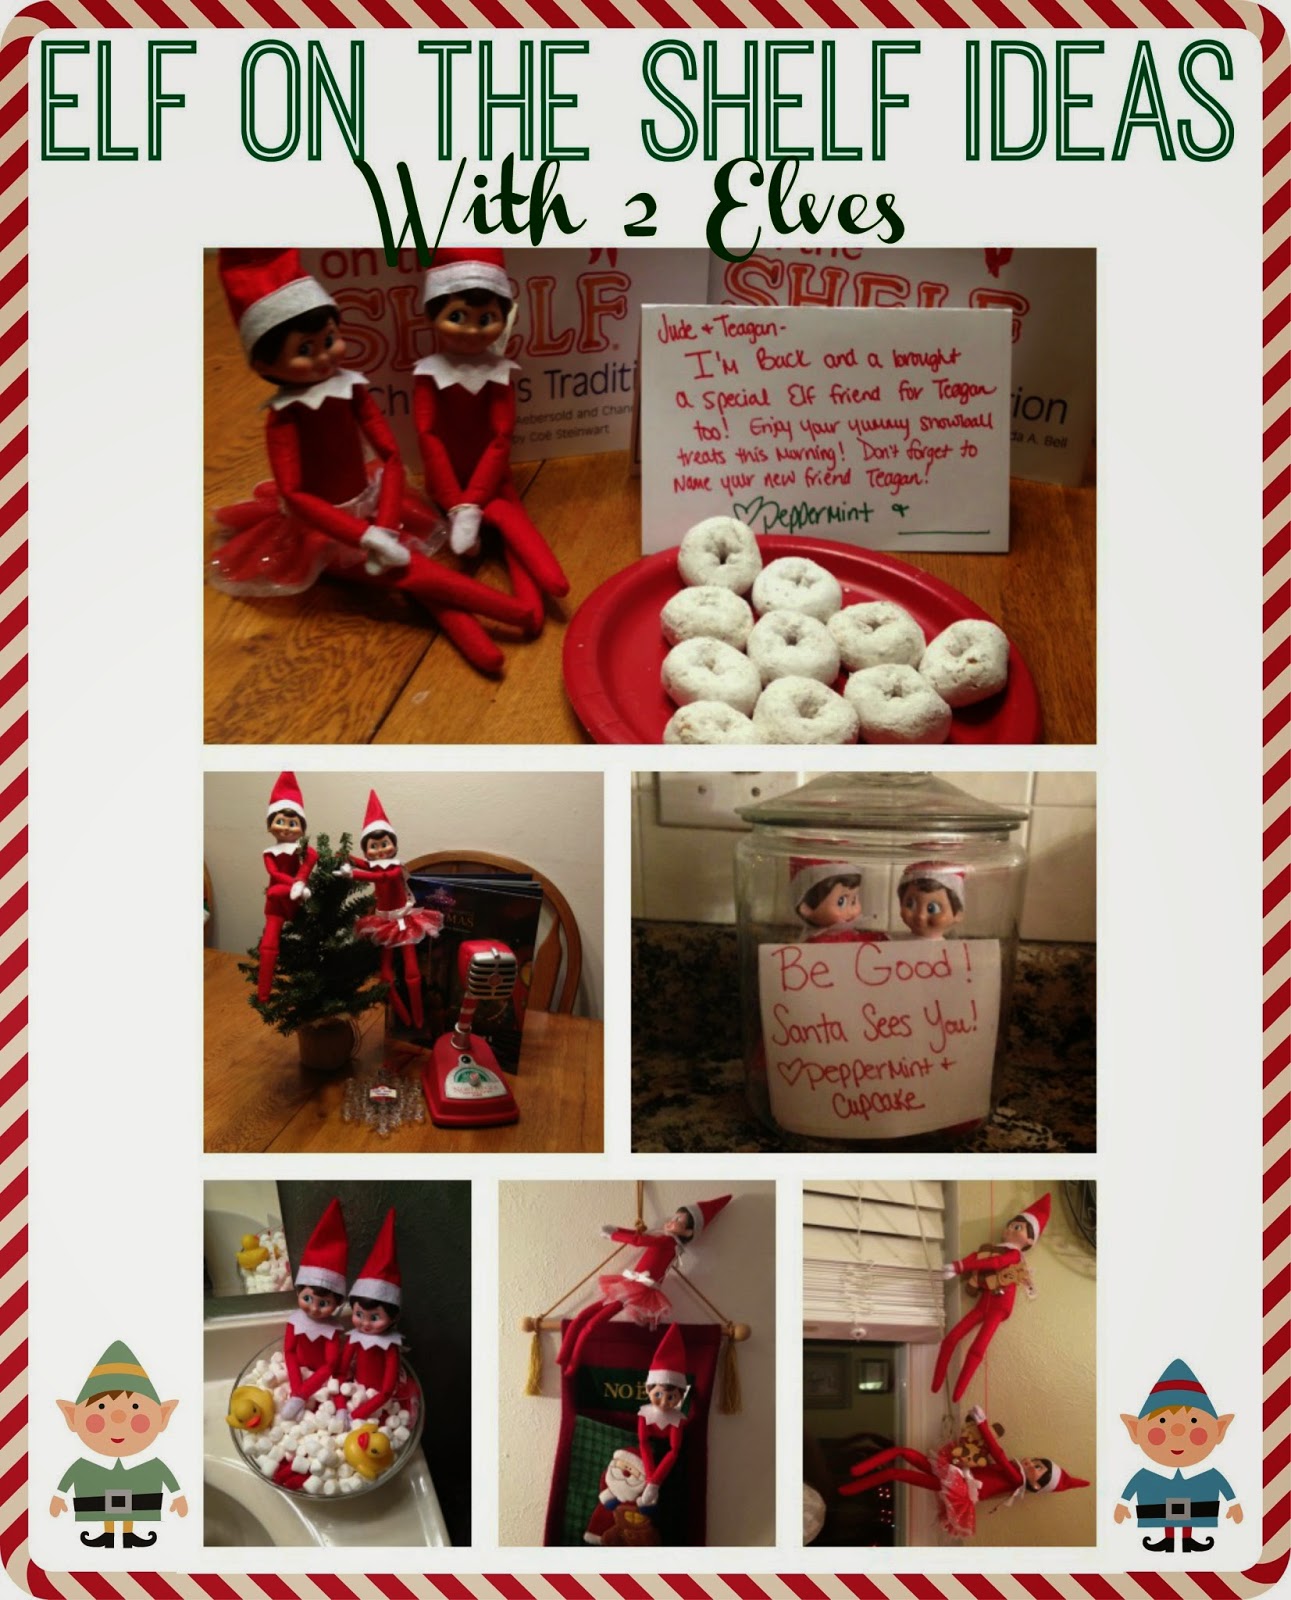 Welcome Elf on the Shelf - Building Our Story